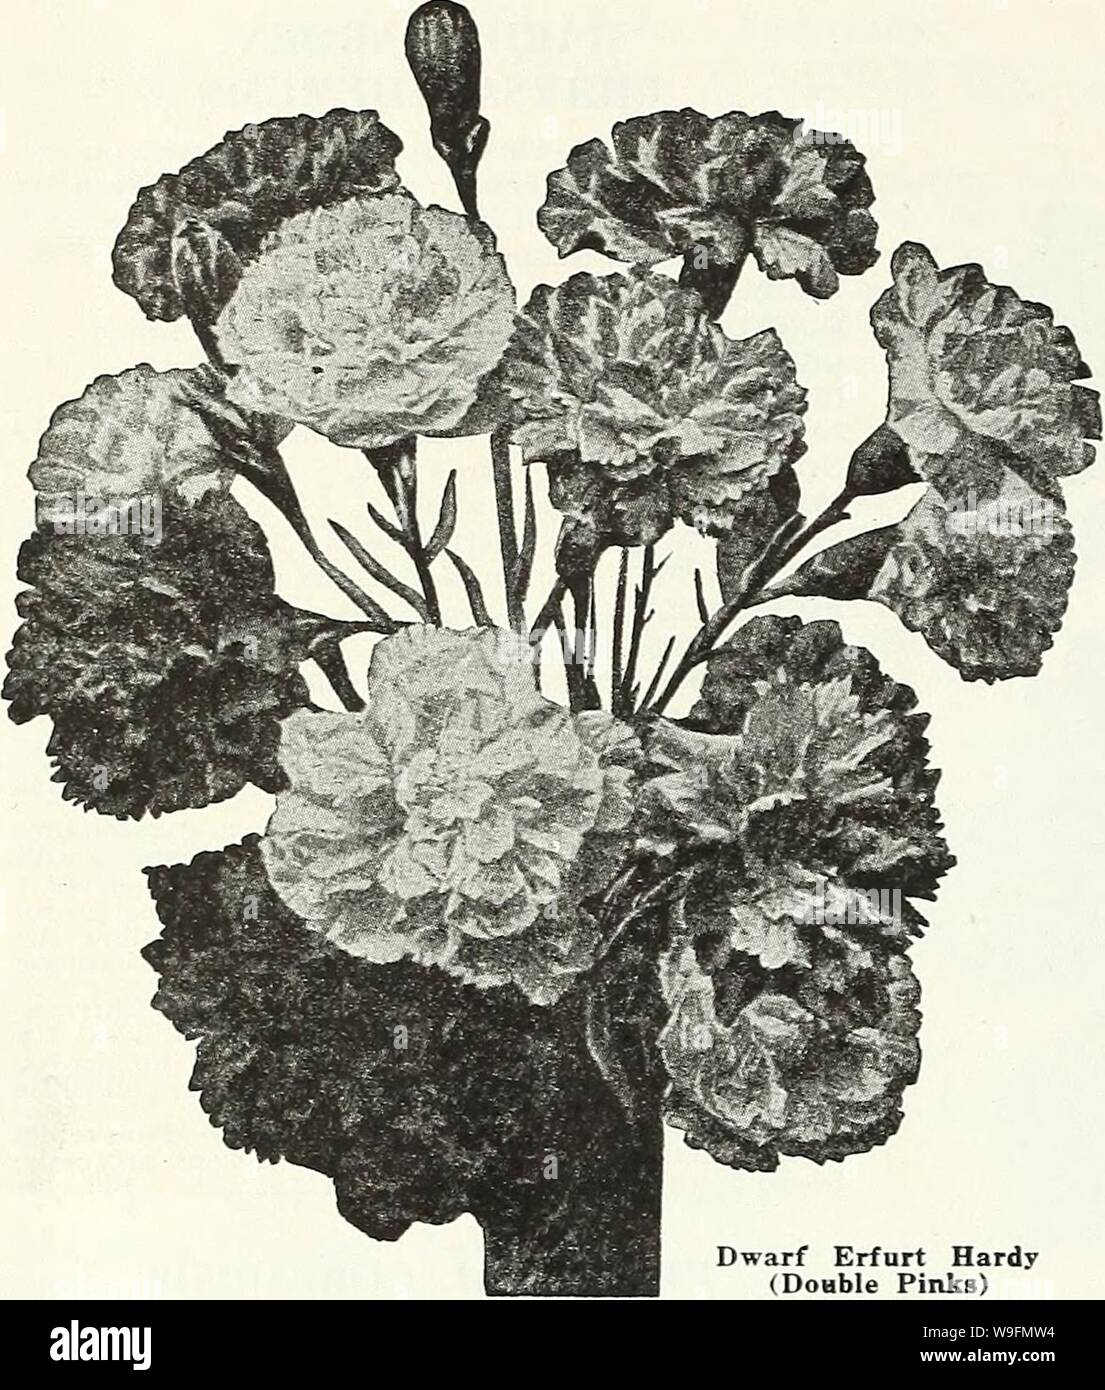 Archive image from page 55 of Currie's garden annual  spring. Currie's garden annual : spring 1936 61st year  curriesgardenann19curr 2 Year: 1936 ( Page 50 CURRIE BROTHERS CO., MILWAUKEE, WIS.    DIANTHUS GARDEN PINKS These low-growing early-flowering hardy pinks are especially desirable for the edges of herbaceous borders, where they can remain undisturbed for many years. The flowers have a de- licious, spicy fragrance, fine for cutting. CAESIUS (Cheddar Pink)—Forms compact cushions of glaucous leaves and sweet-scented, rose-pink flowers in May and June; fine for the rock garden. Plants, pric Stock Photo